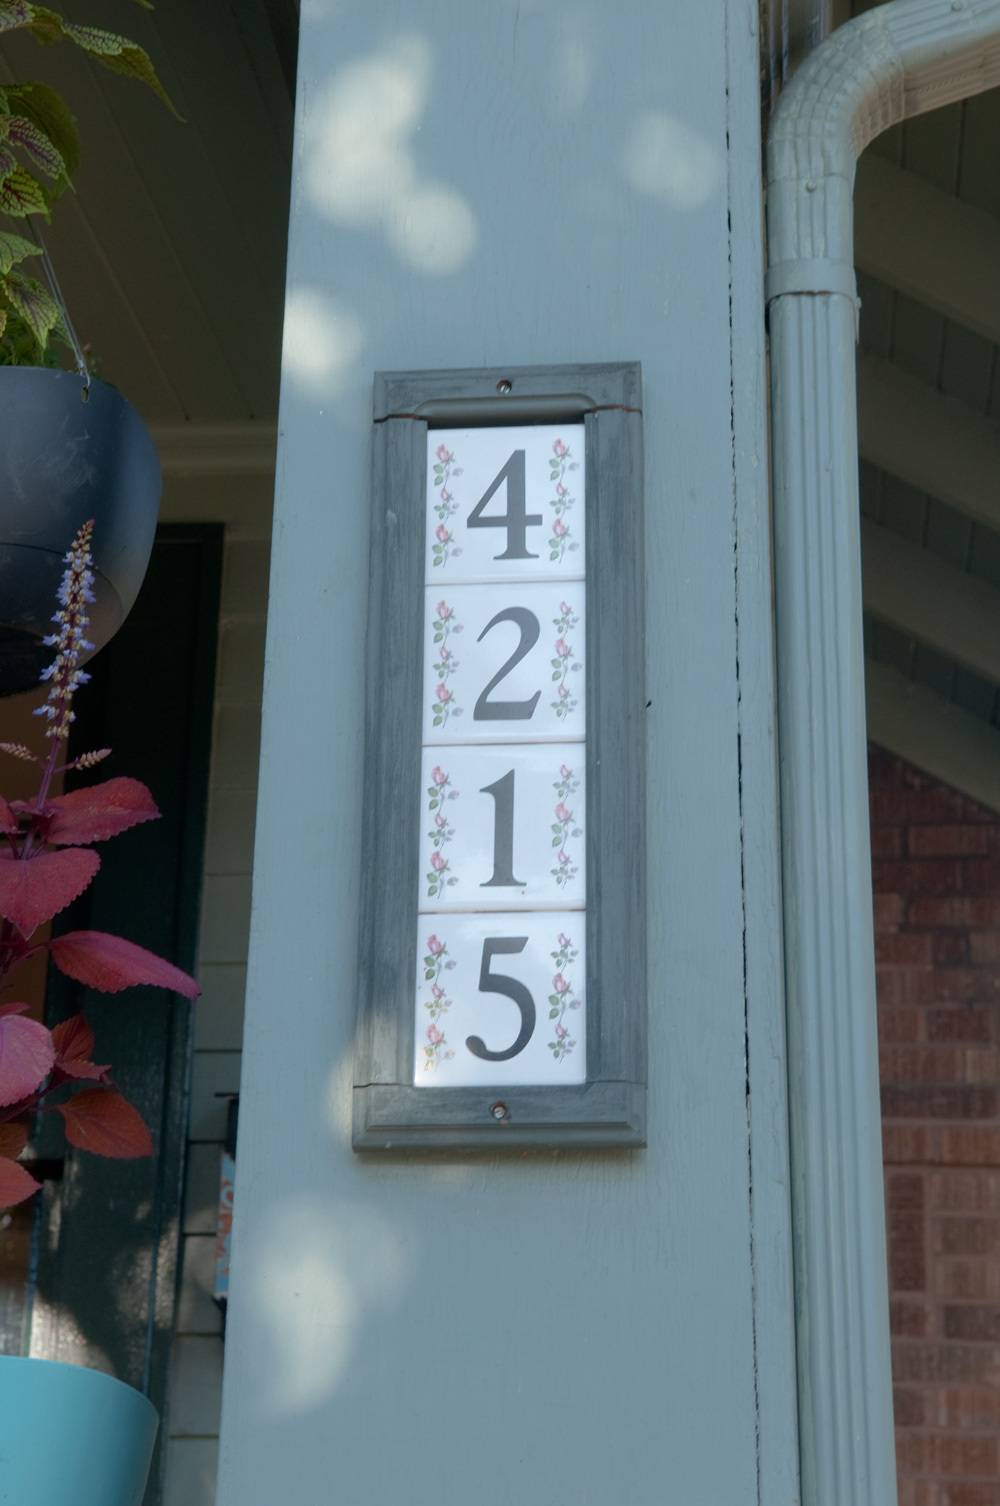 Decorativr tiles with numbers on them by the front door of the house.